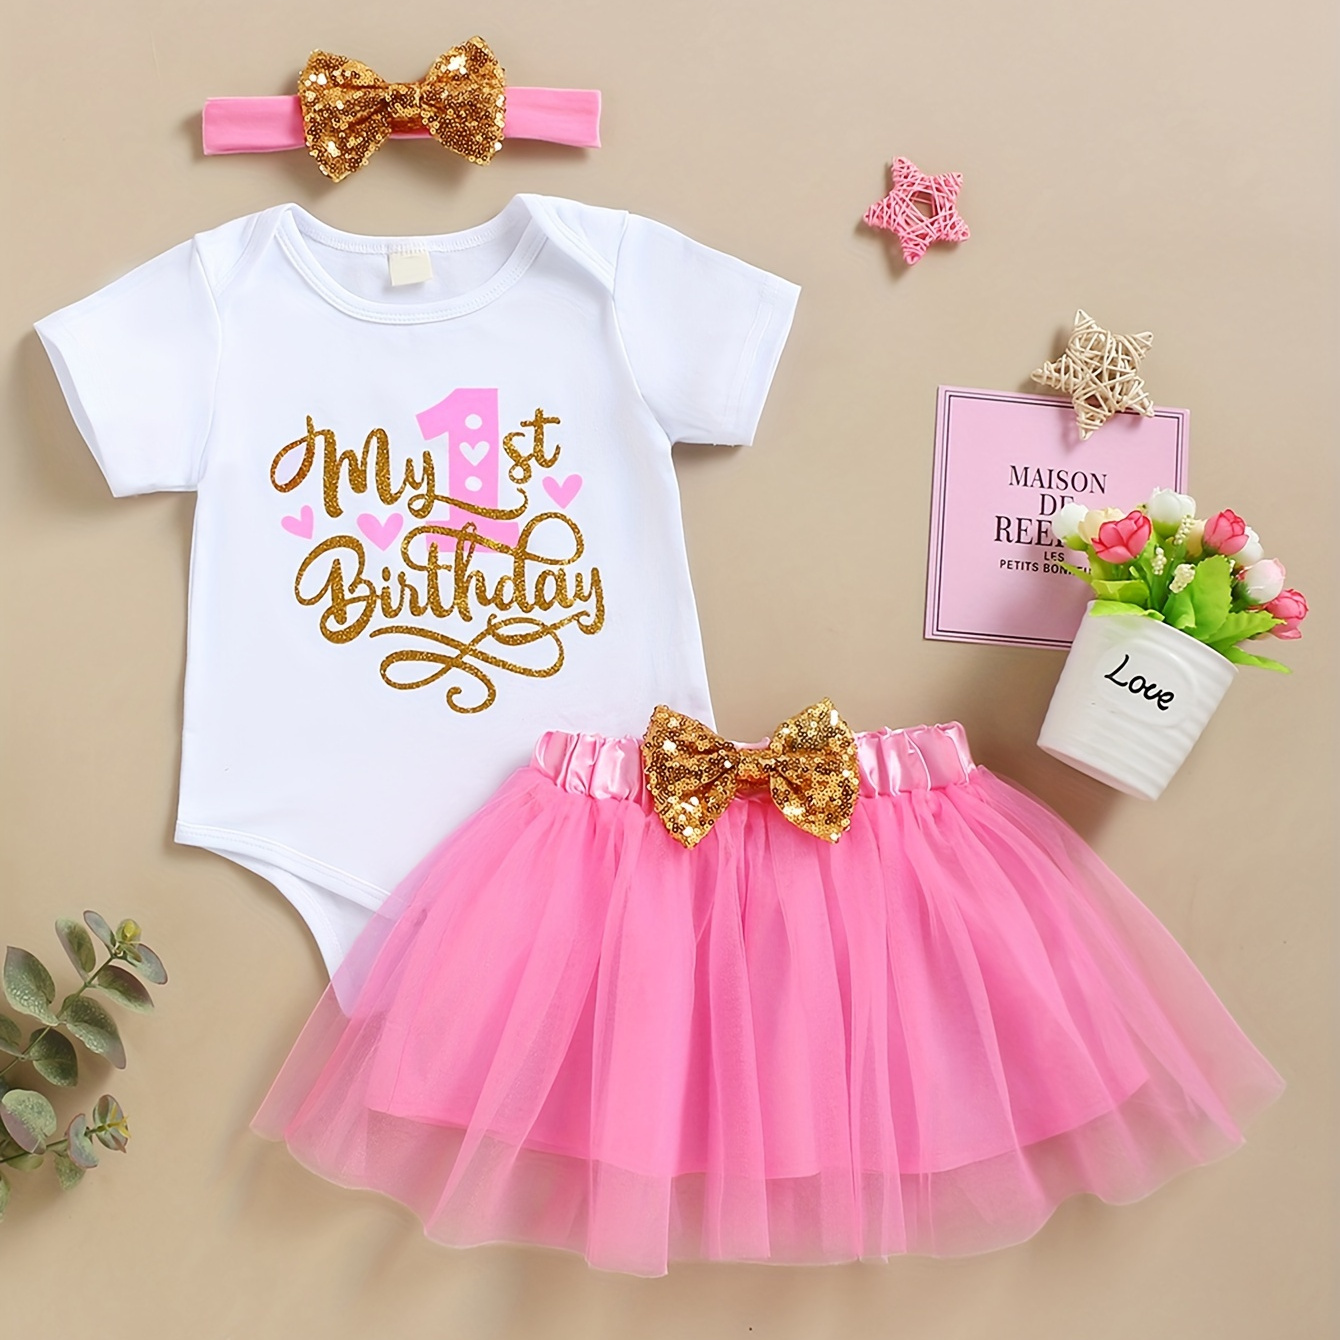 

Baby Girl Birthday Cake Smash Outfit Toddler Girl My 1st Birthday Romper Tutu Skirt With Headband Clothes Set